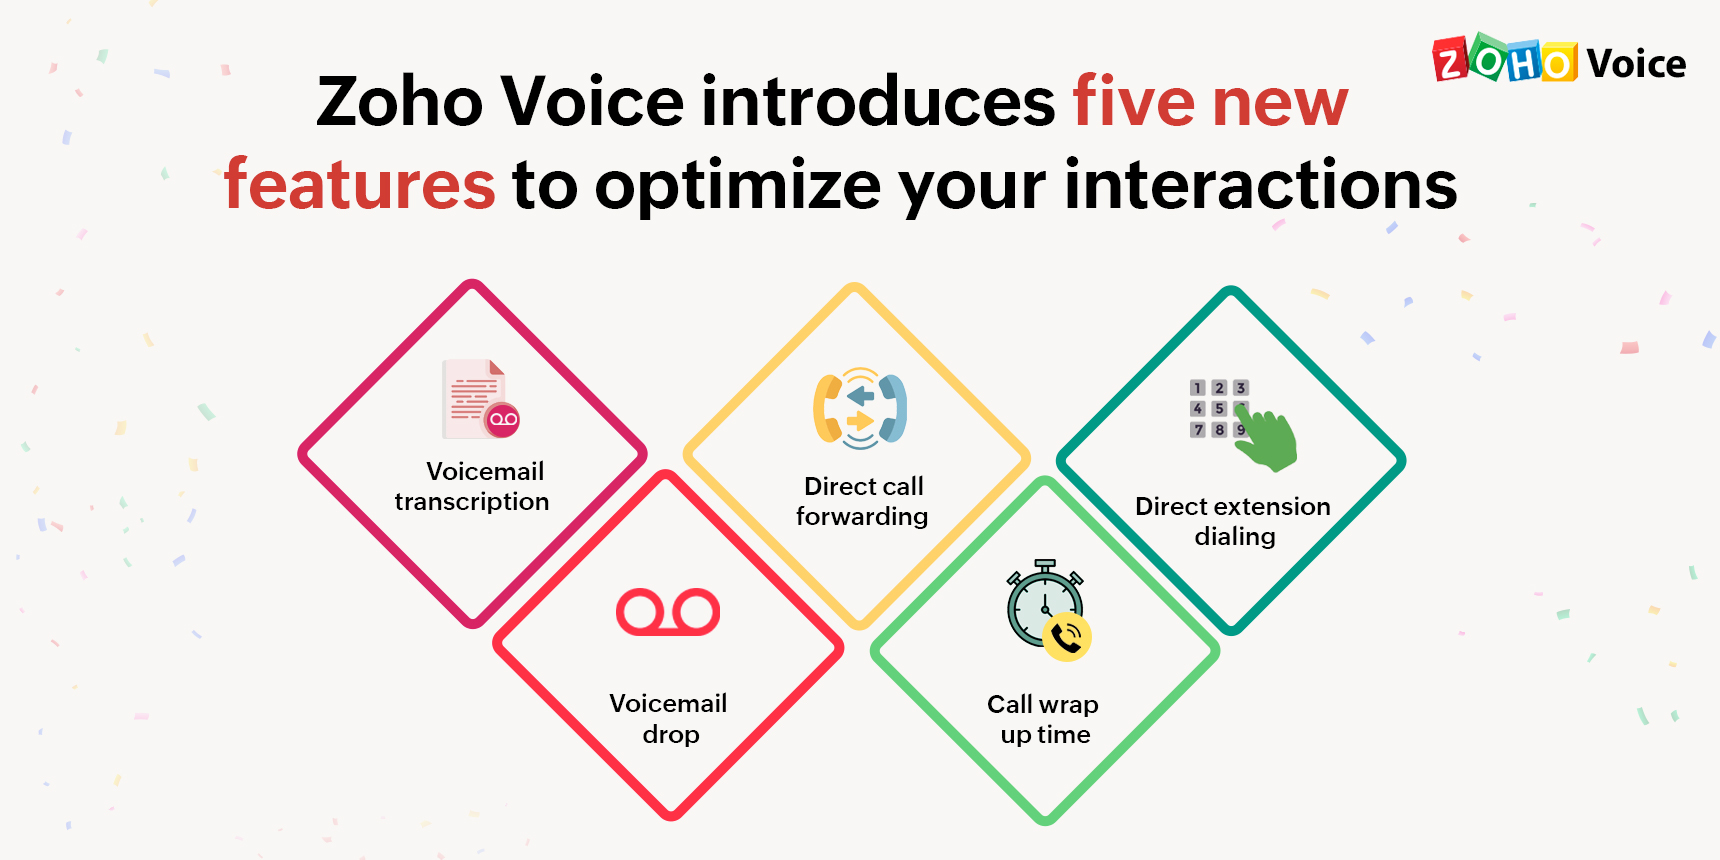 Product updates from Zoho Voice: What’s new in June?